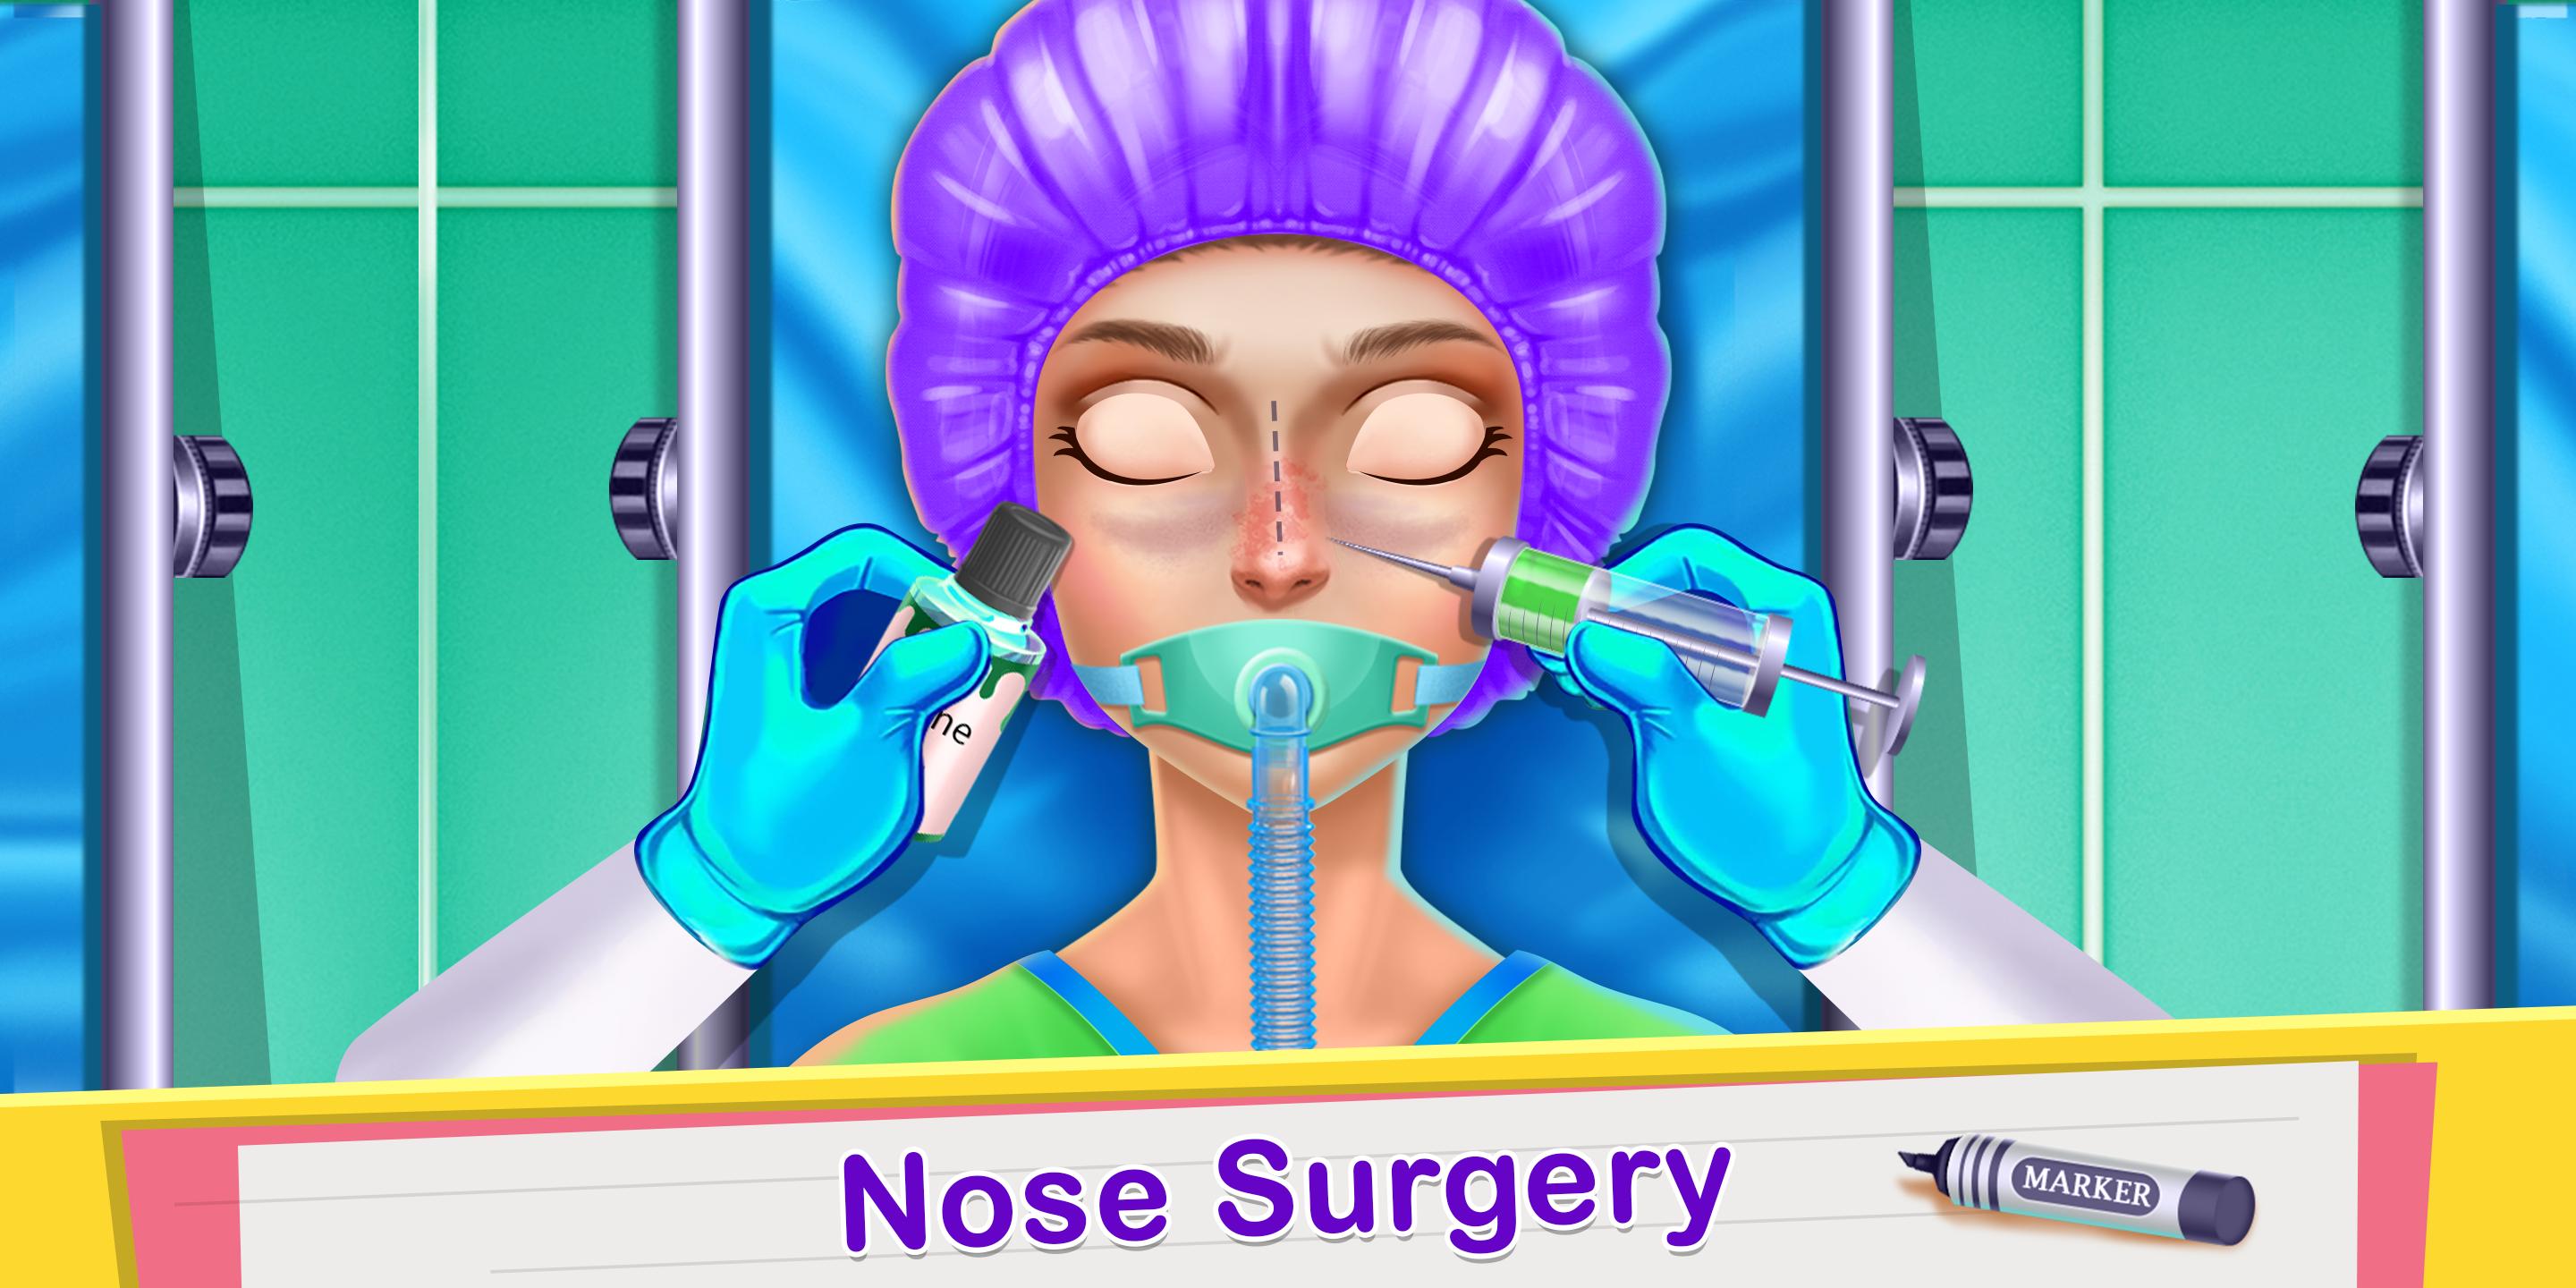 Surgery mod. Хирургия больница игра. Talking Tom Neck Surgery Hospital. Talking Tom Neck Surgery Hospital game. Fun Baby Doctor game - learn Play fun Plastic Surgery Simulator - games for Kids become Doctor (p2).